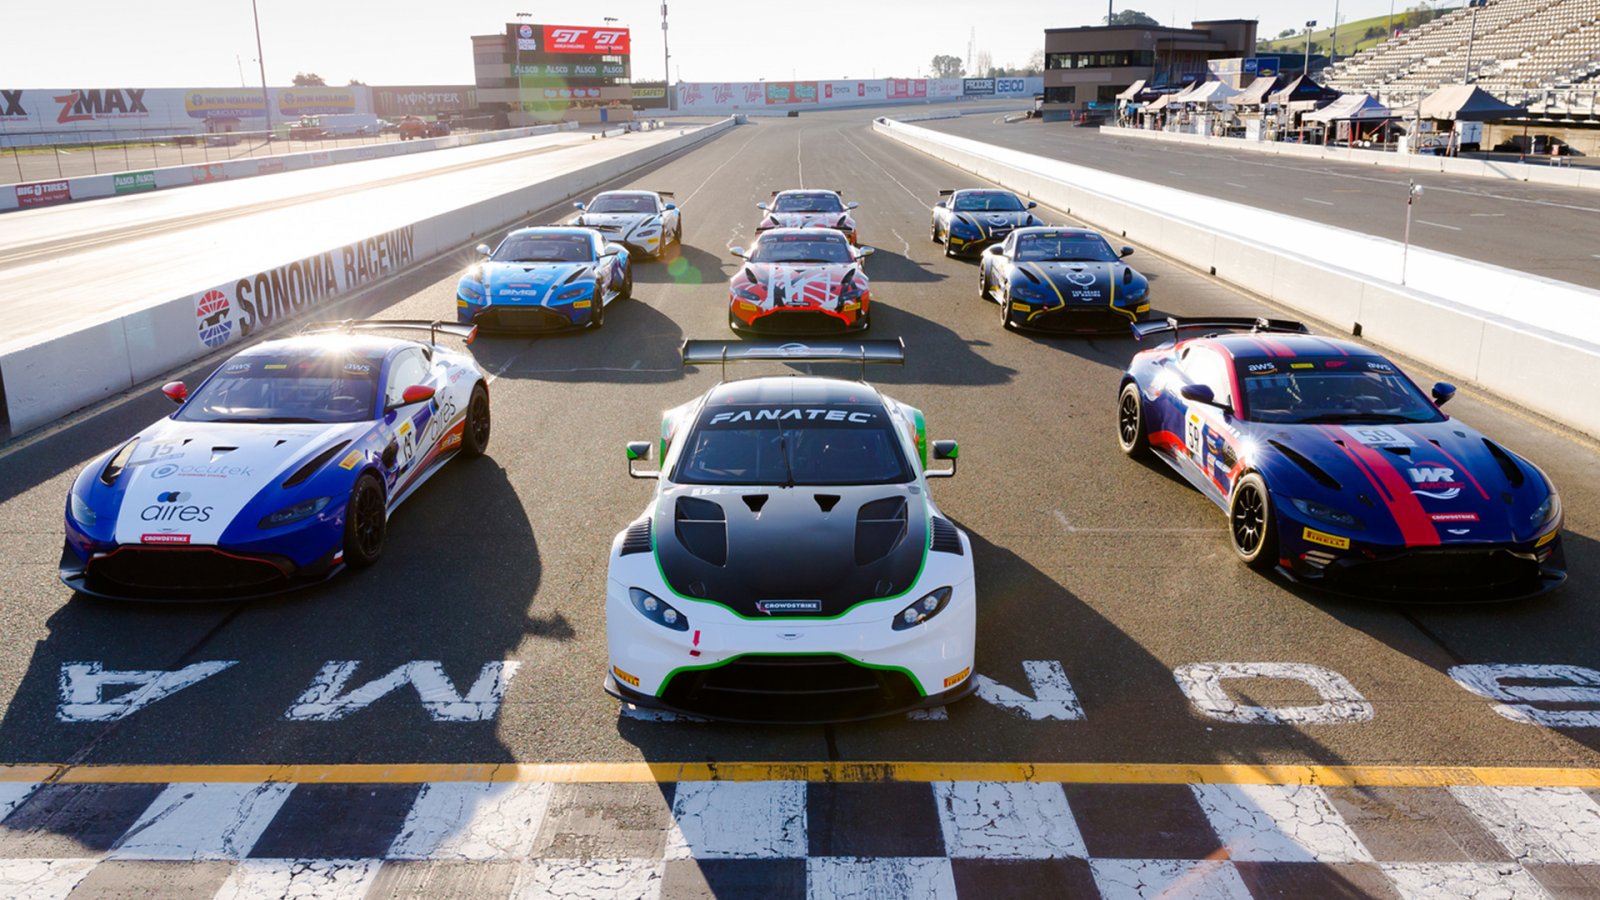 Championship-winning Aston Martin Vantage GT4 Entered for 2021 US GT World Challenge in Record Numbers